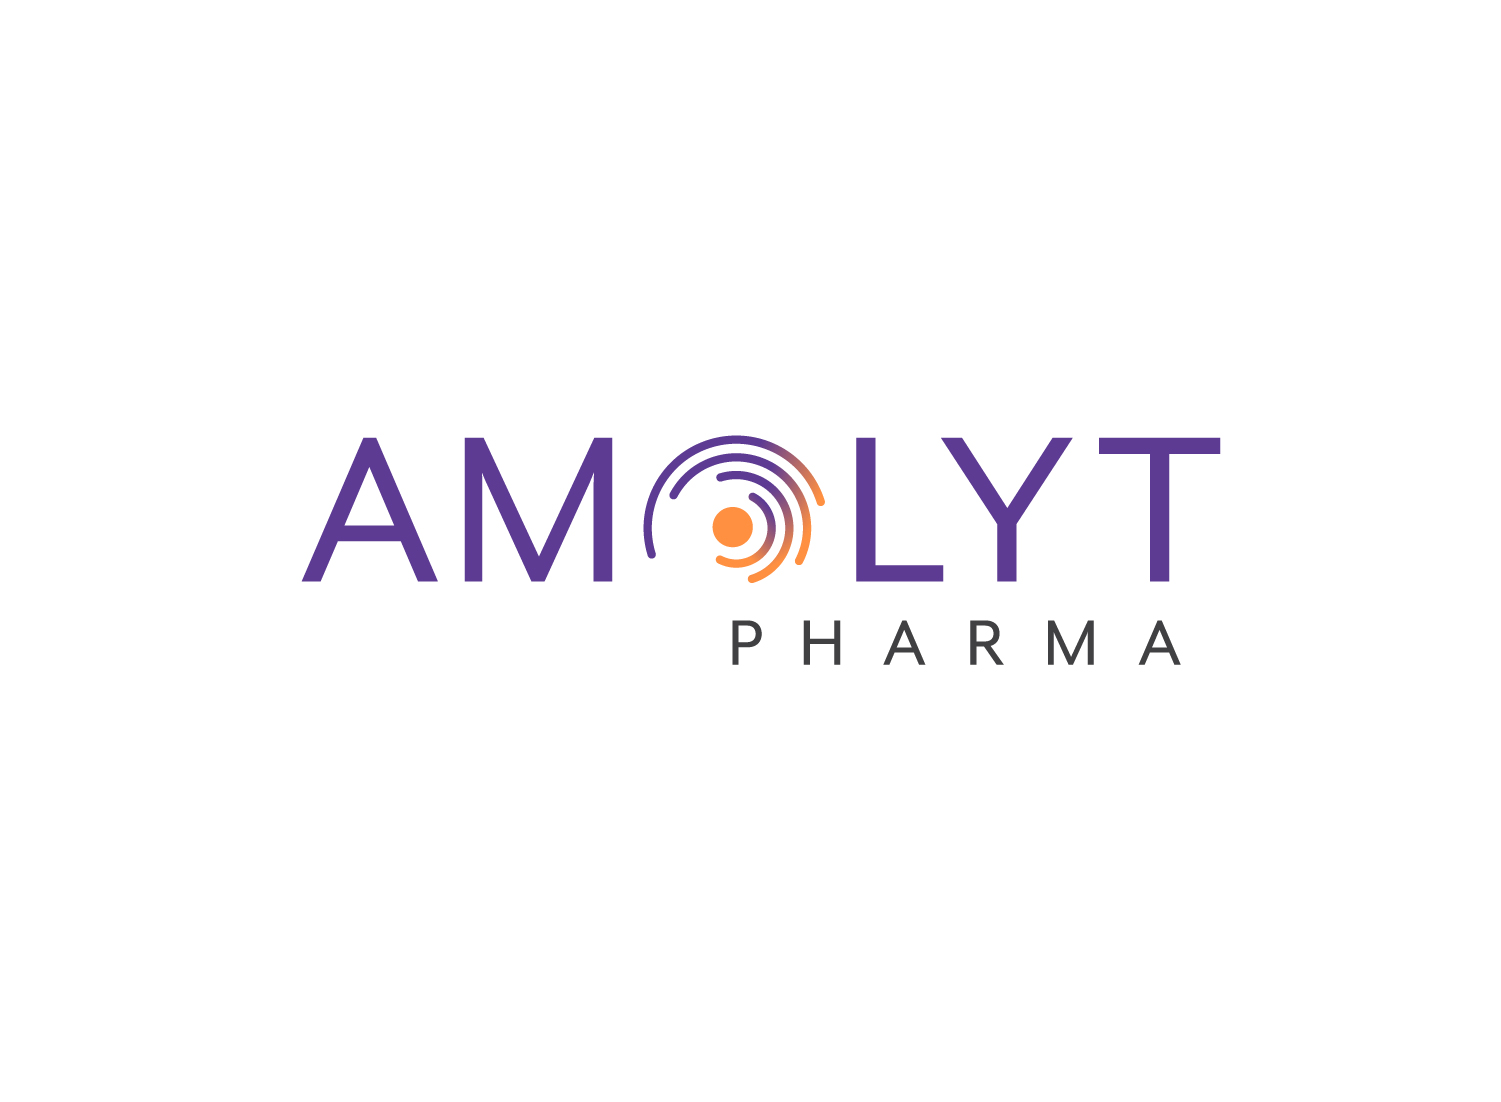 Amolyt Pharma Announces Abstracts Accepted for Presentation at ECE and ENDO